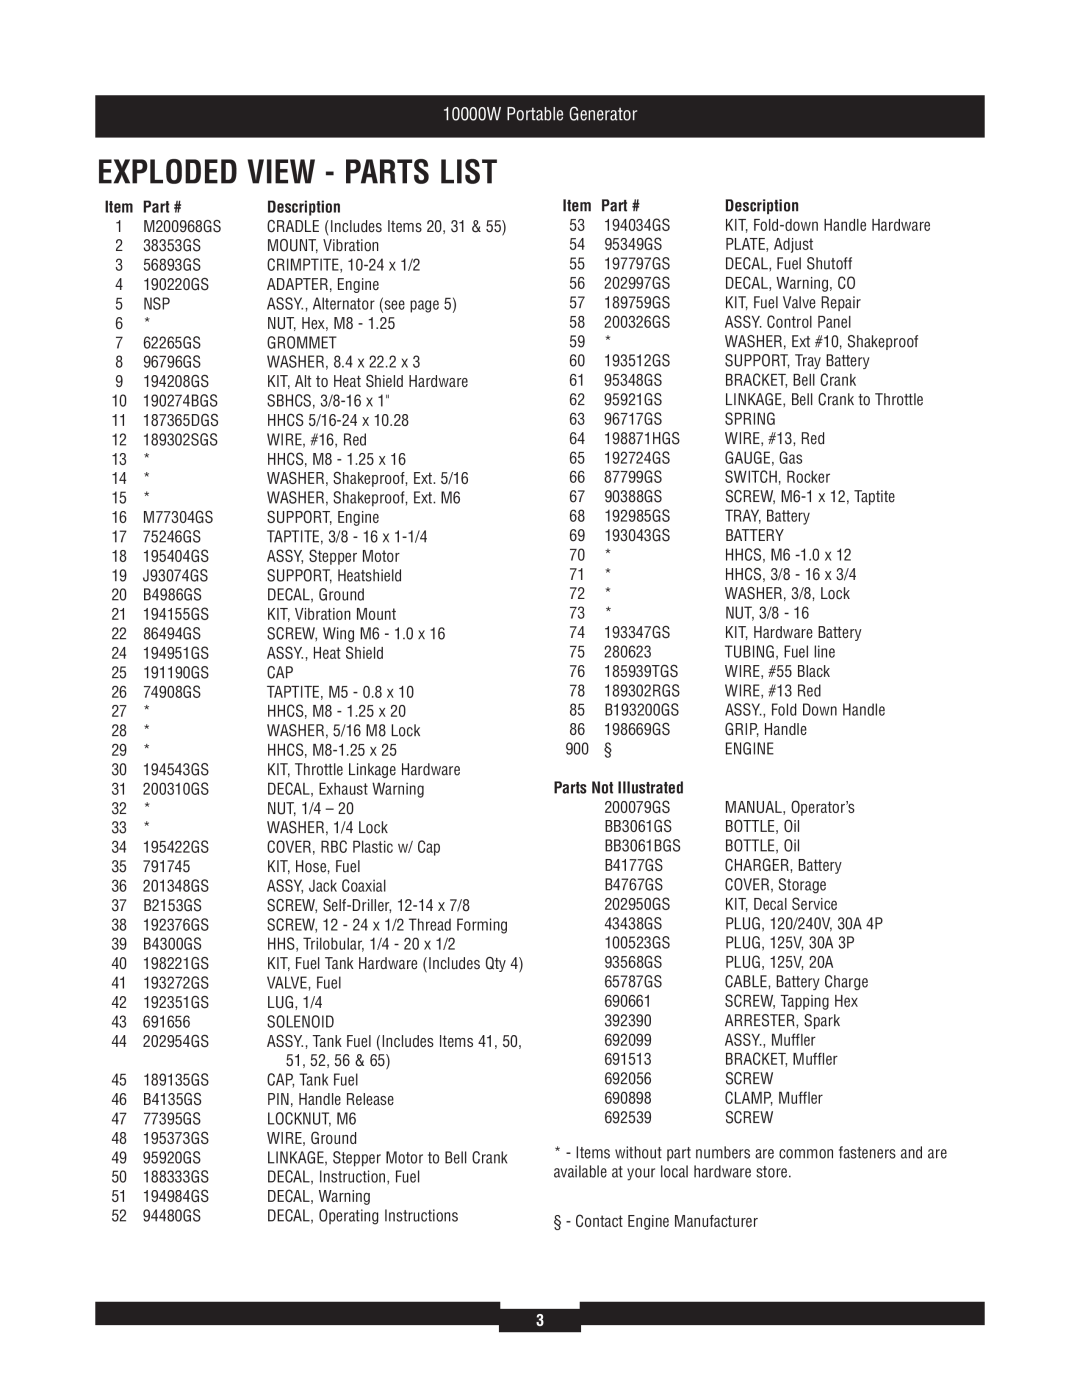 Briggs & Stratton 30207 manual Exploded View - Parts List, 10000W Portable Generator, Description, Parts Not Illustrated 